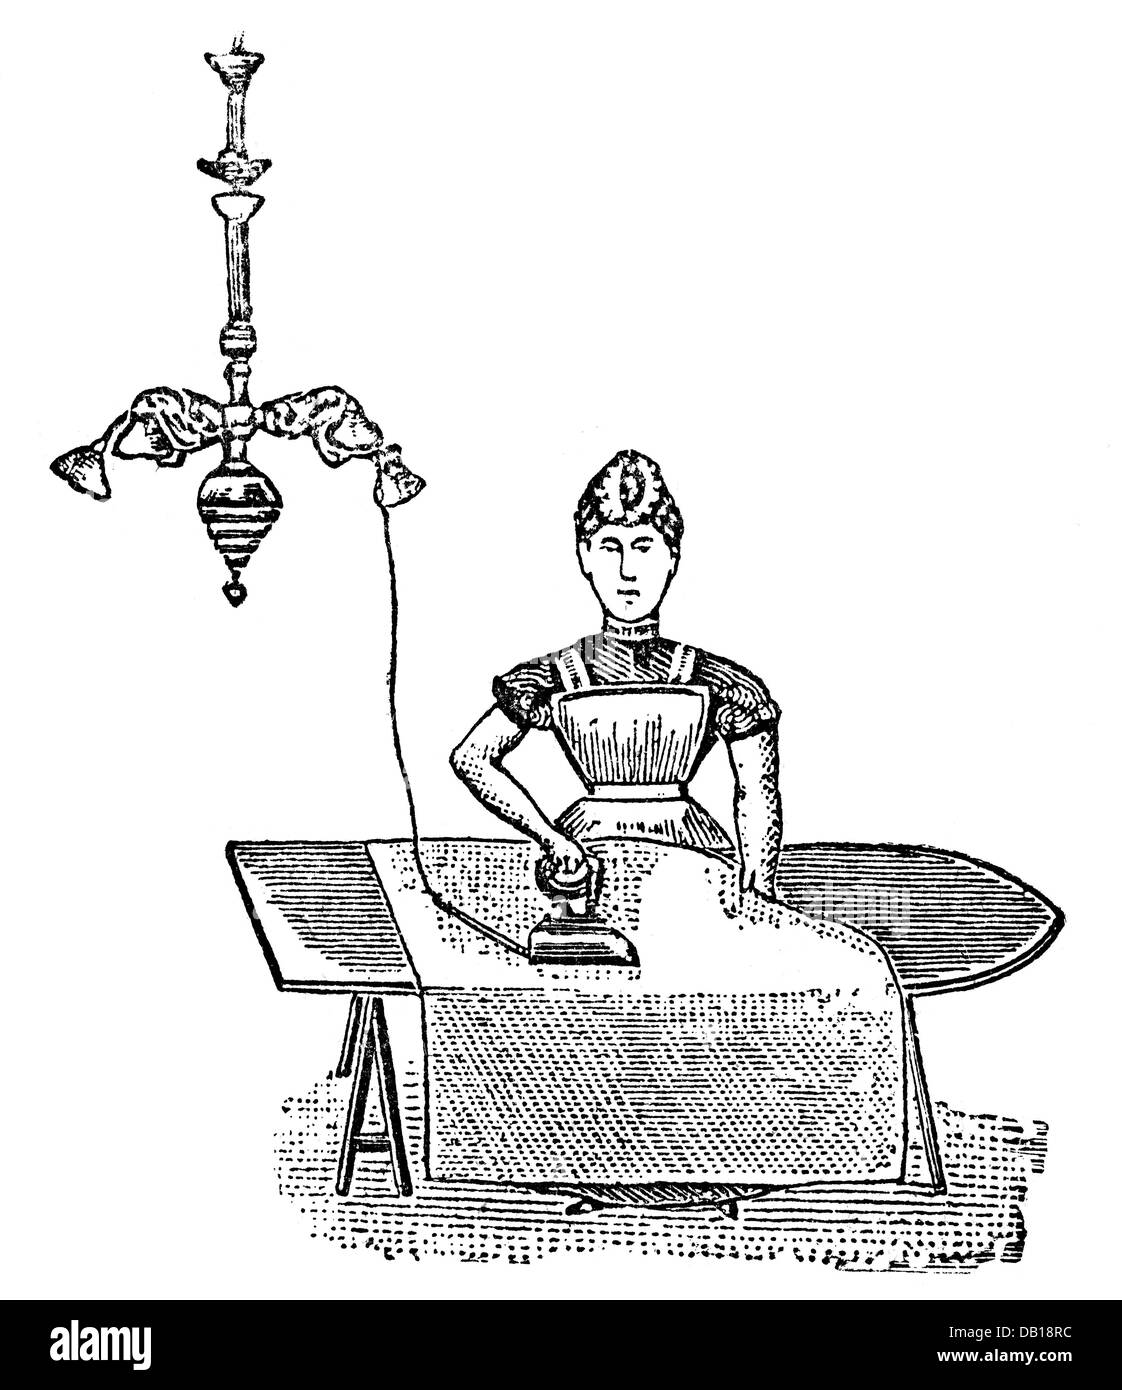 household, household appliance, electric iron, brass, polished, wood engraving, from: Friedrich Eduard Bilz, New Naturopathic Treatment, Leipzig, Germany, 1902, Additional-Rights-Clearences-Not Available Stock Photo